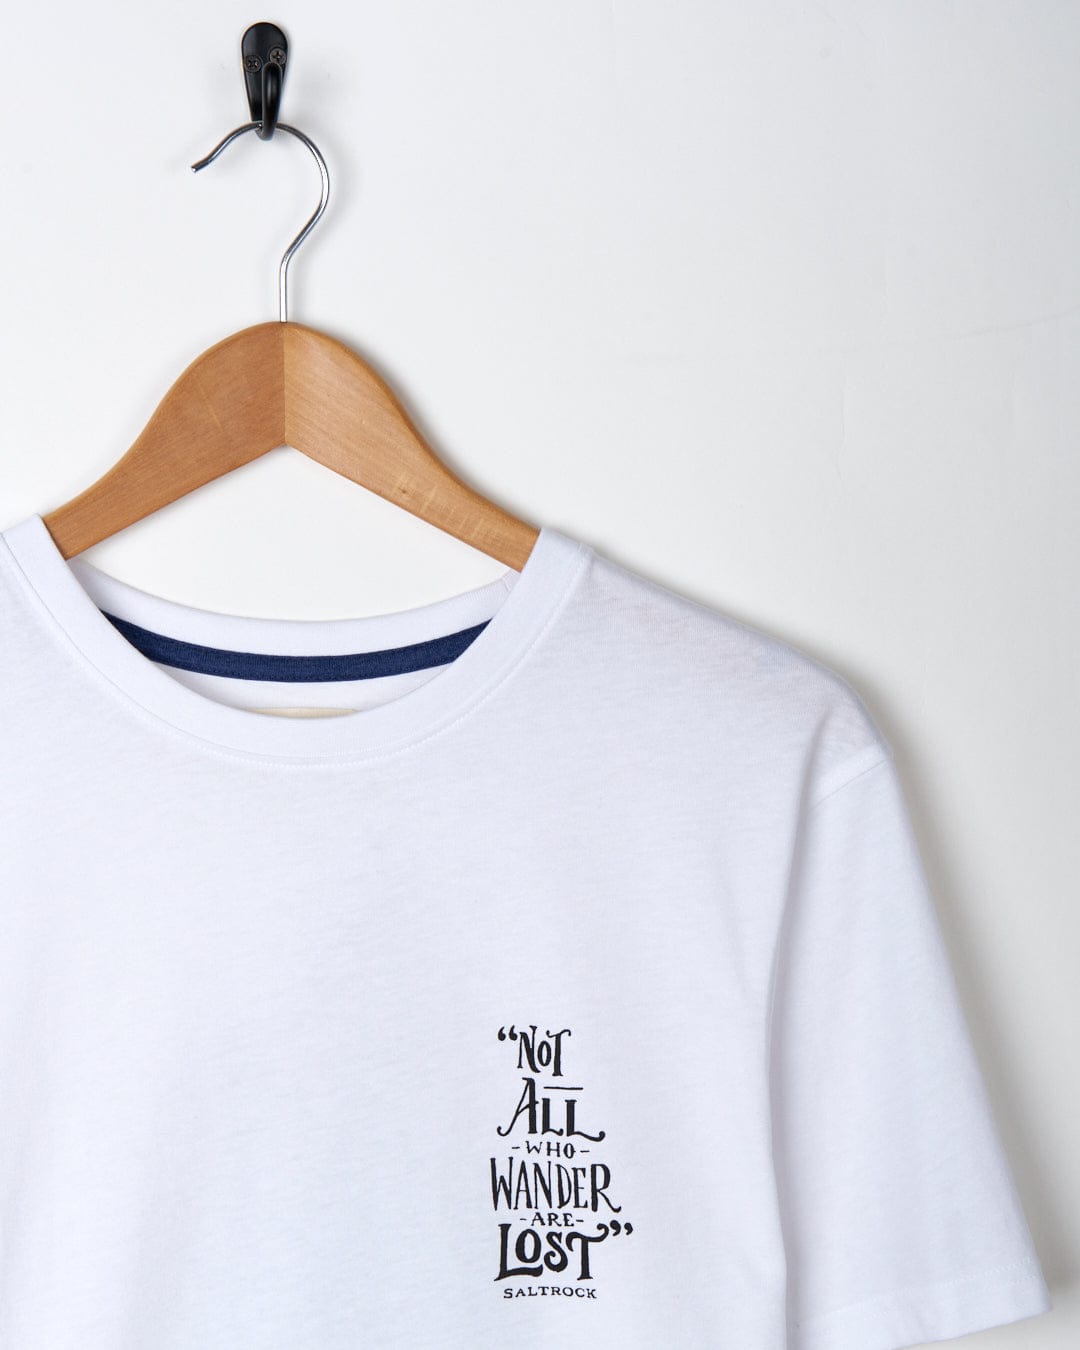 A white Saltrock Lost Ships Short Sleeve T-shirt with a text quote "not all who wander are lost" hanging on a wooden hanger against a white background.